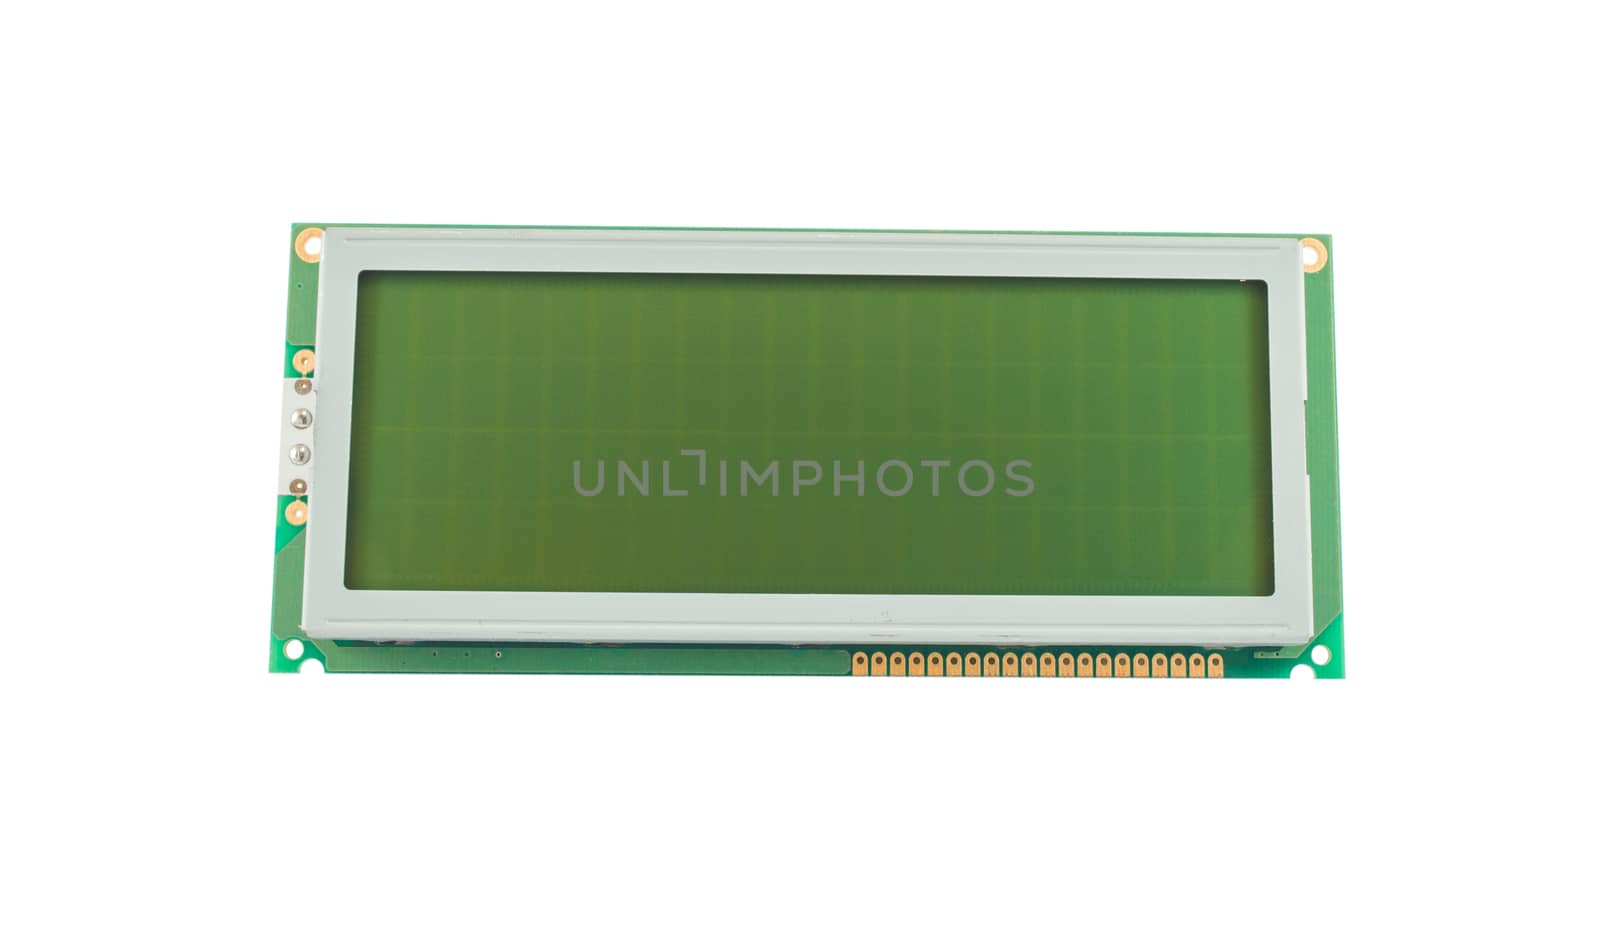 Empty liquid crystal character display (LCD) isolated on a white background
